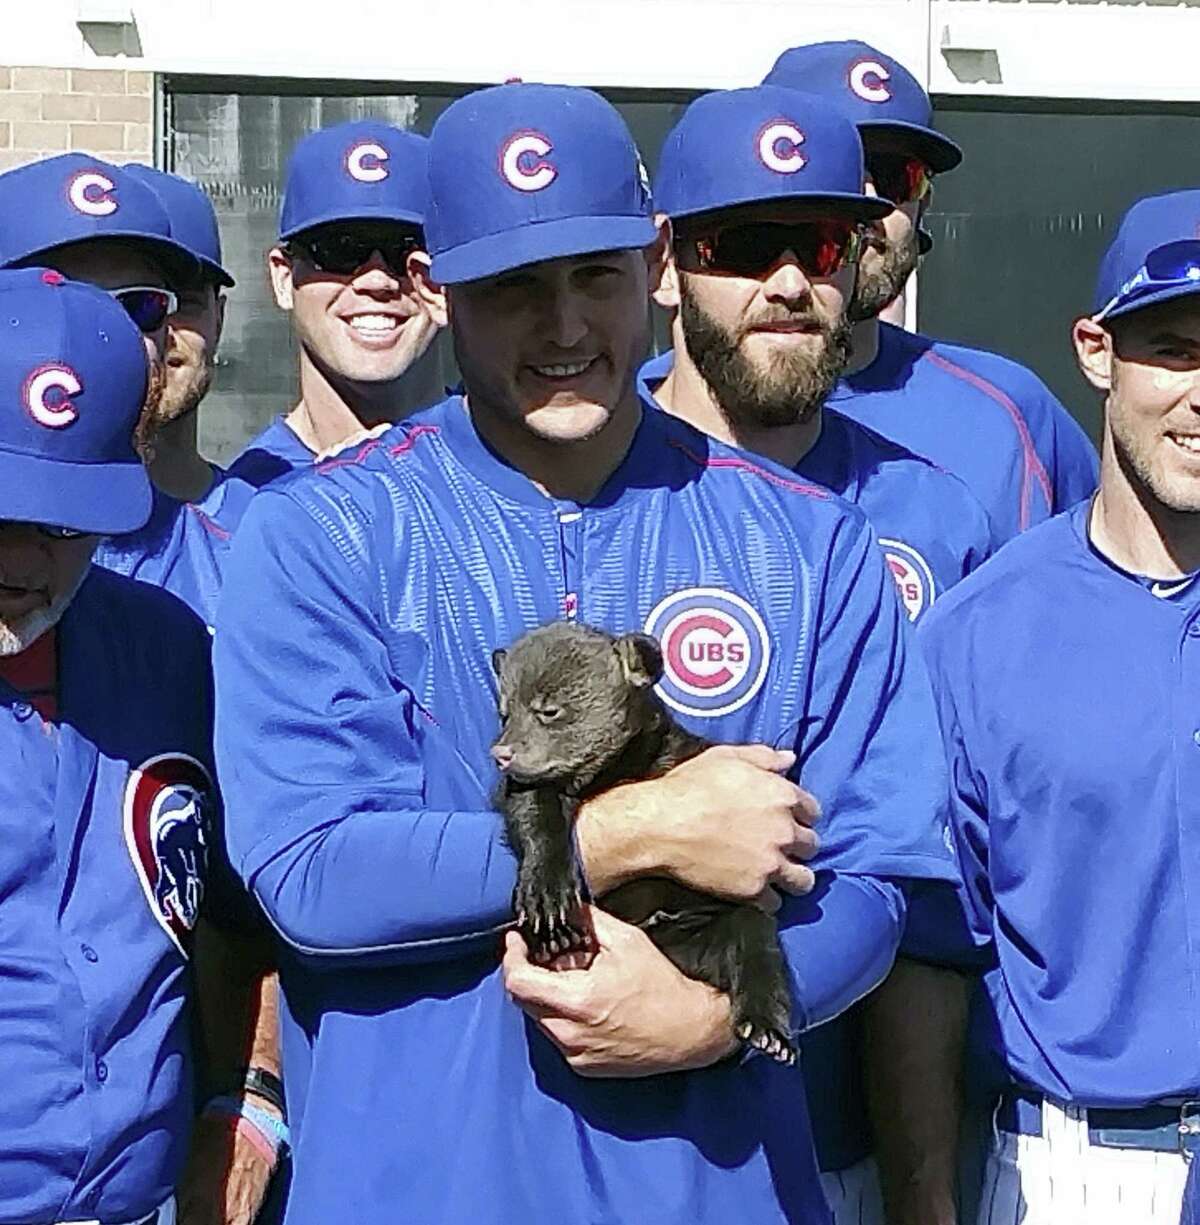 The Cubs’ Anthony Rizzo holds one of two bear cubs Friday in Mesa, Ariz. The 10- to 12-week old cubs were brought in from Bearizona, a wildlife park, the latest tactic by manager Joe Maddon to keep spring training light before the workday begins.